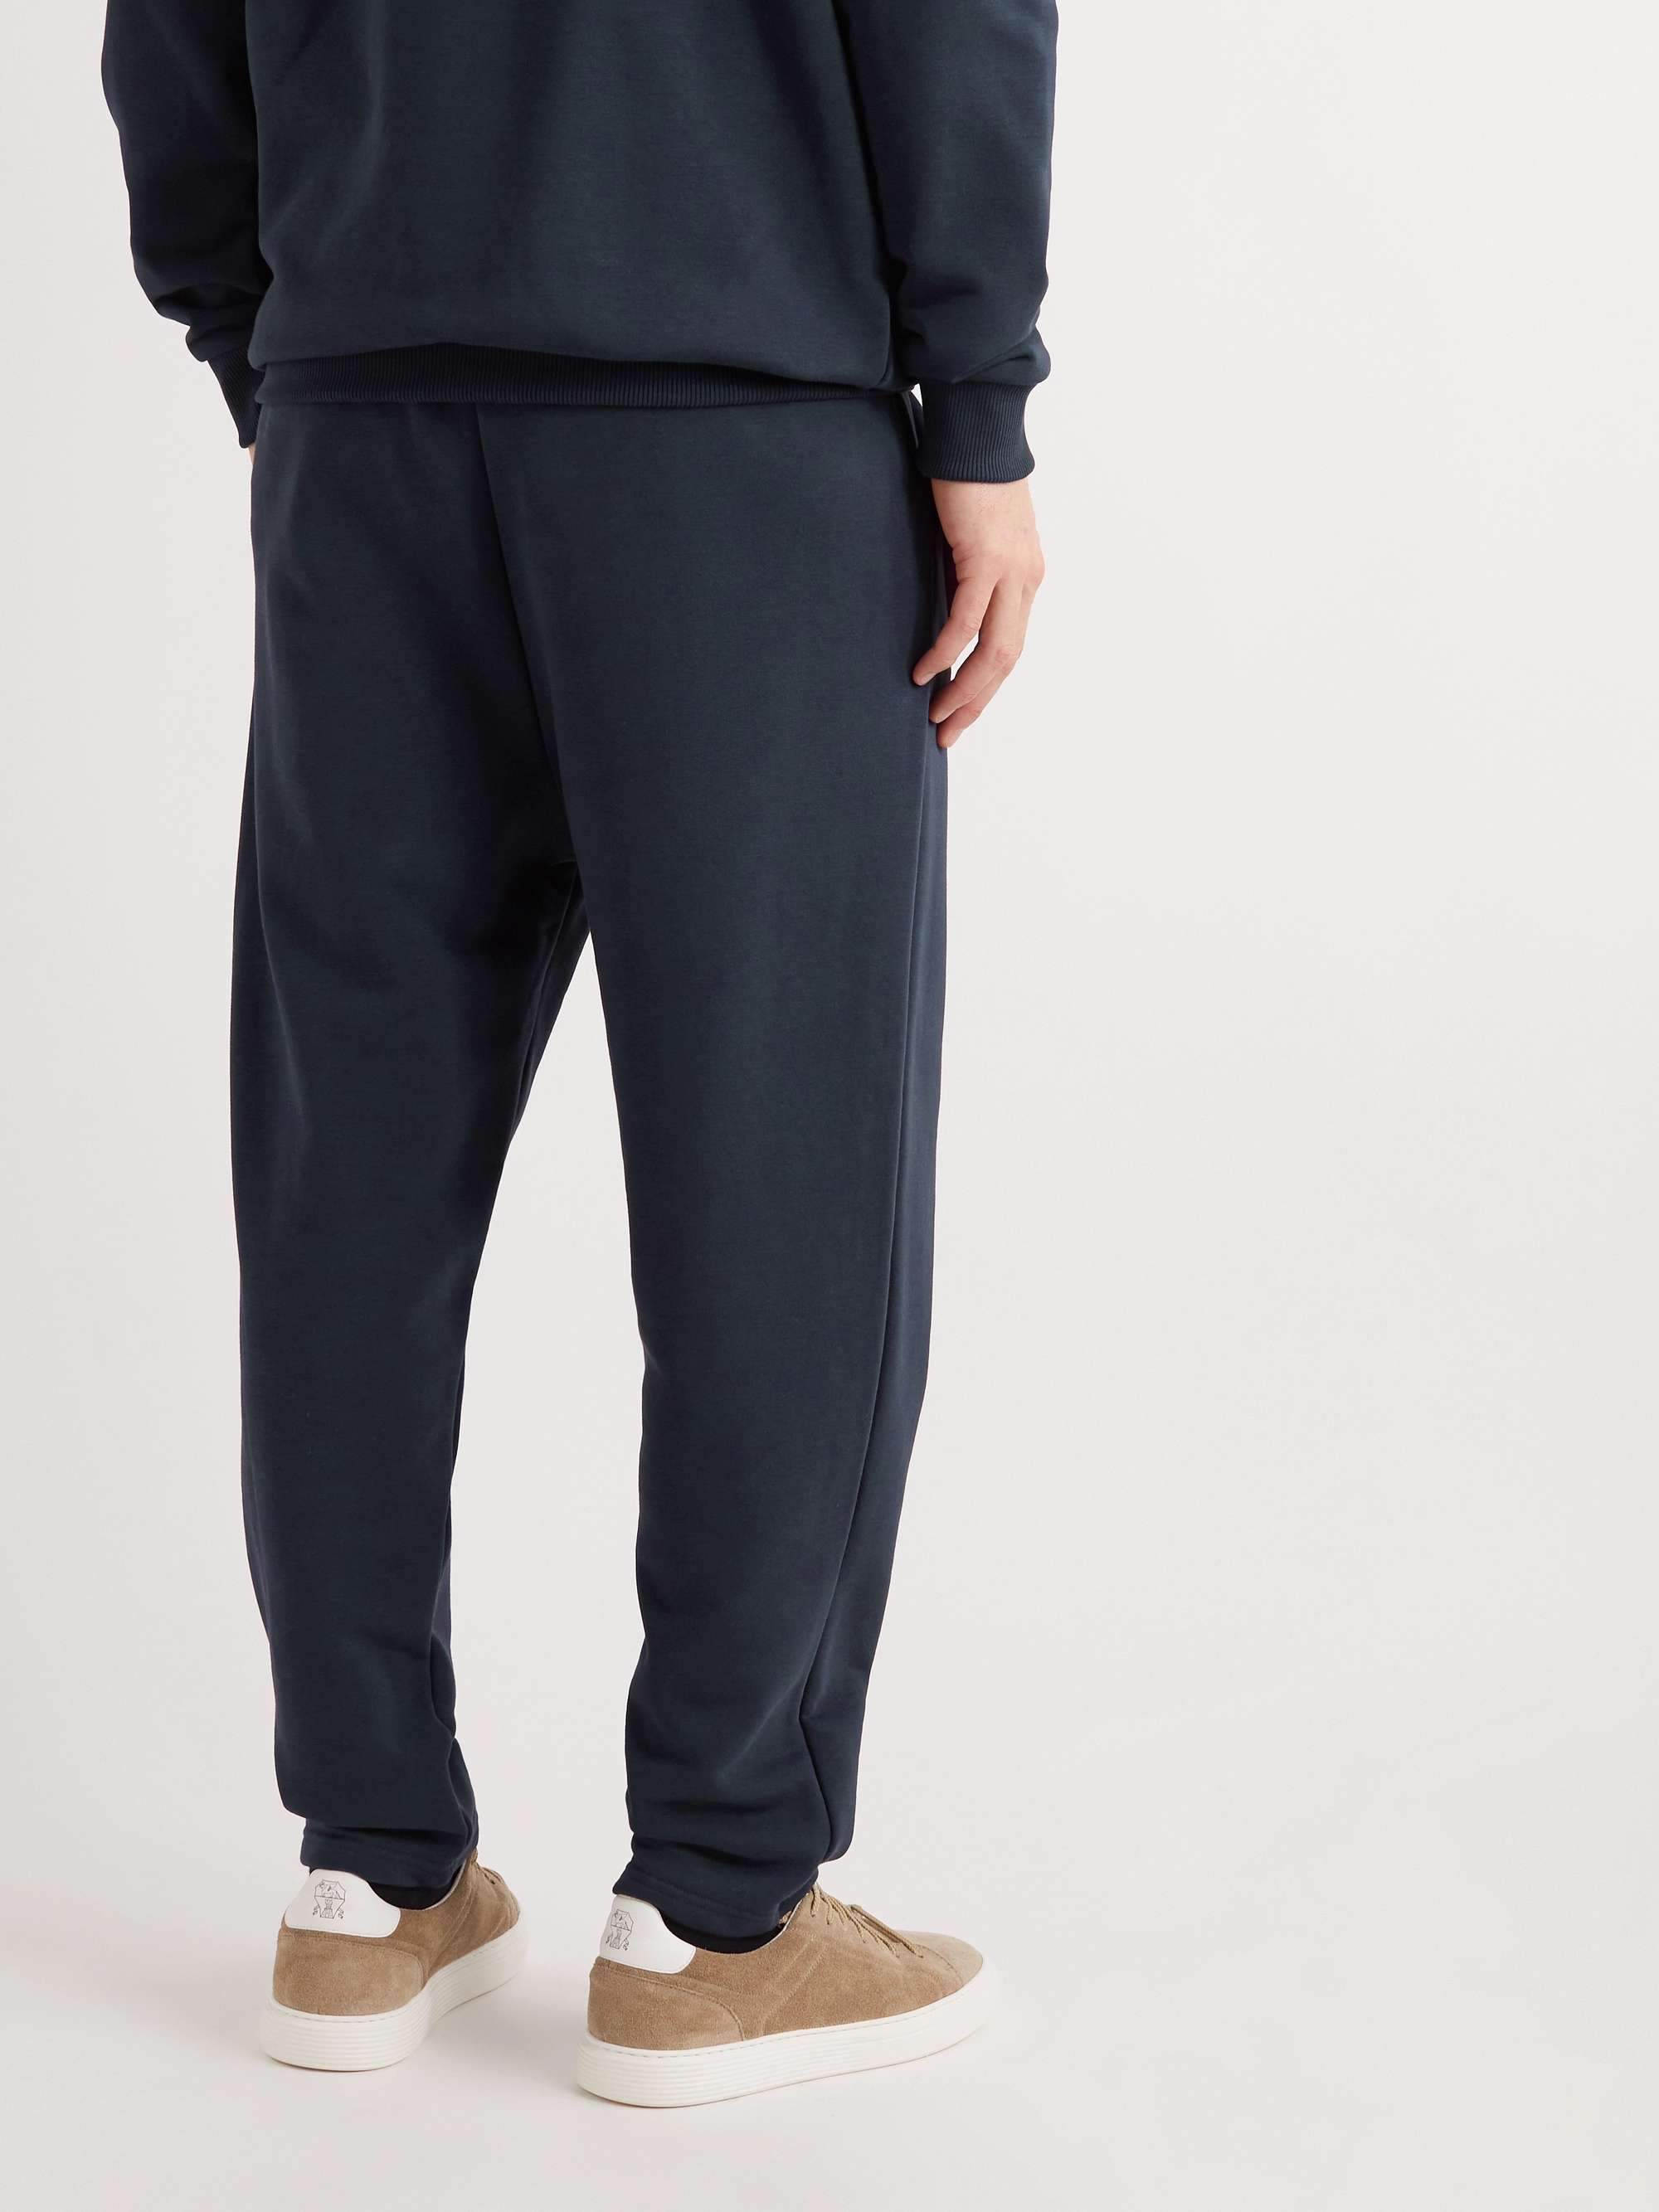 ZEGNA Tapered Cotton-Blend Jersey Sweatpants